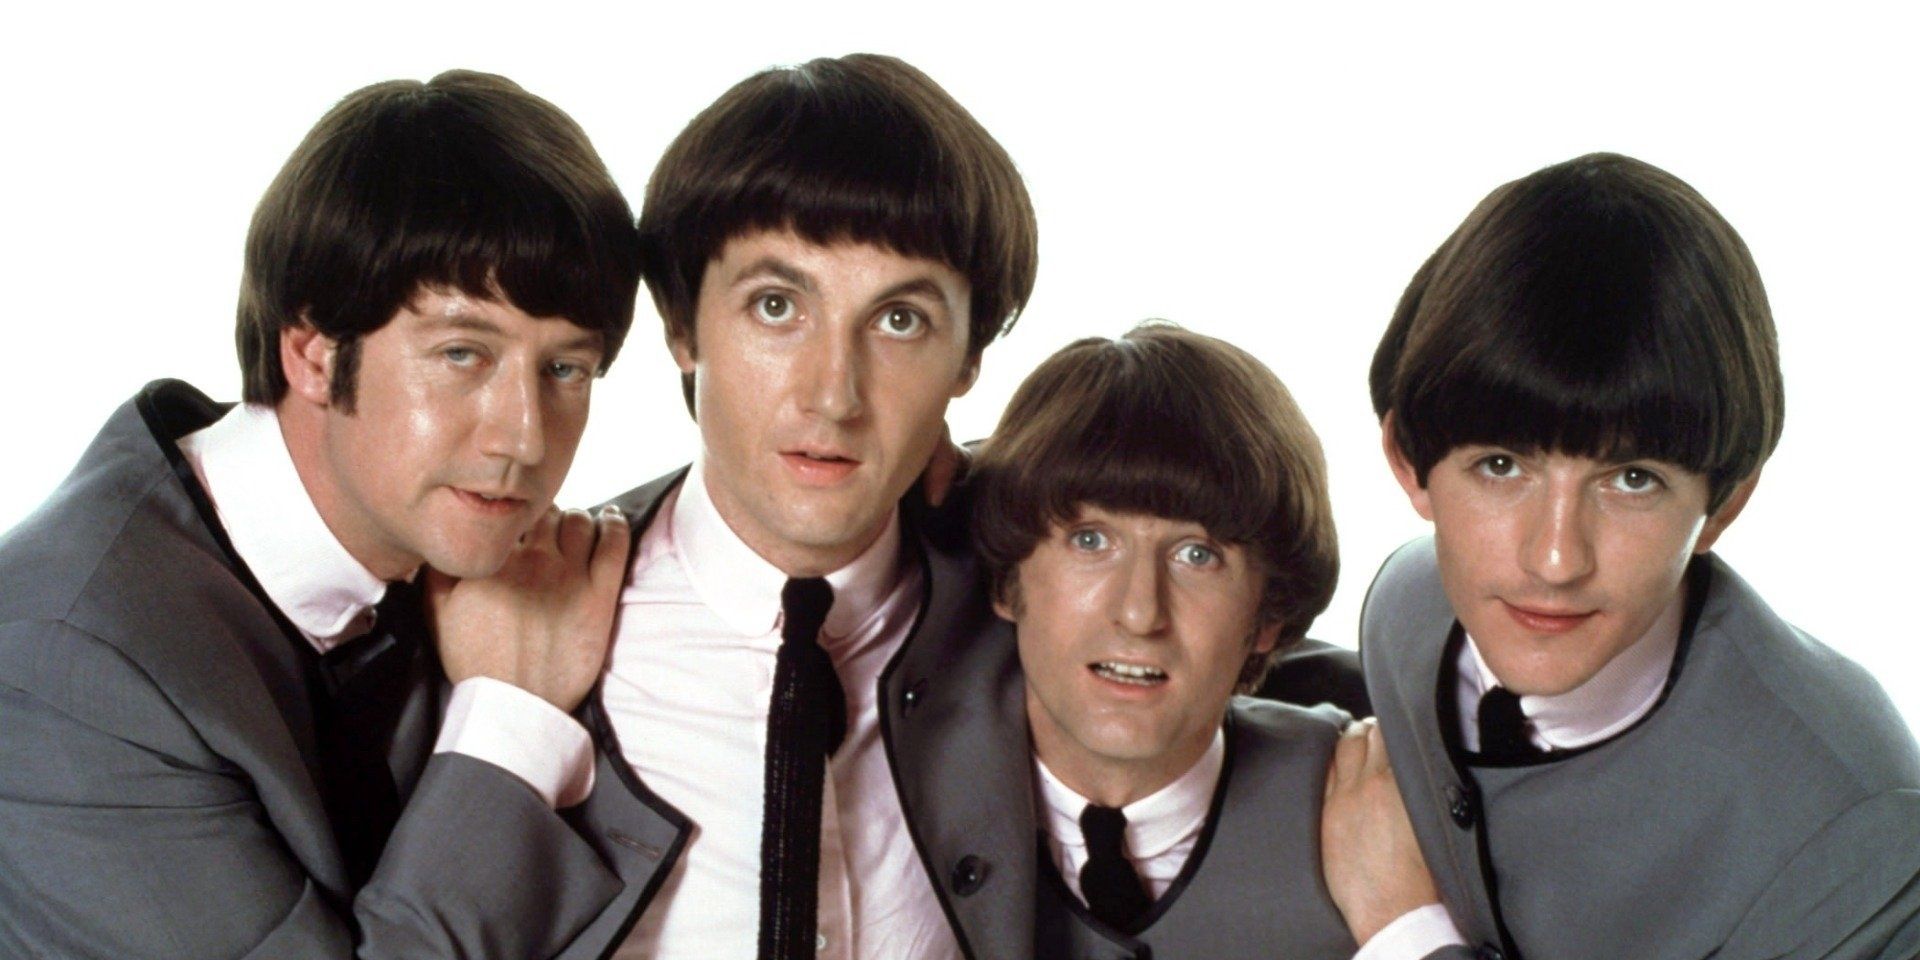 Actors dressed like The Beatles in Birth of the Beatles